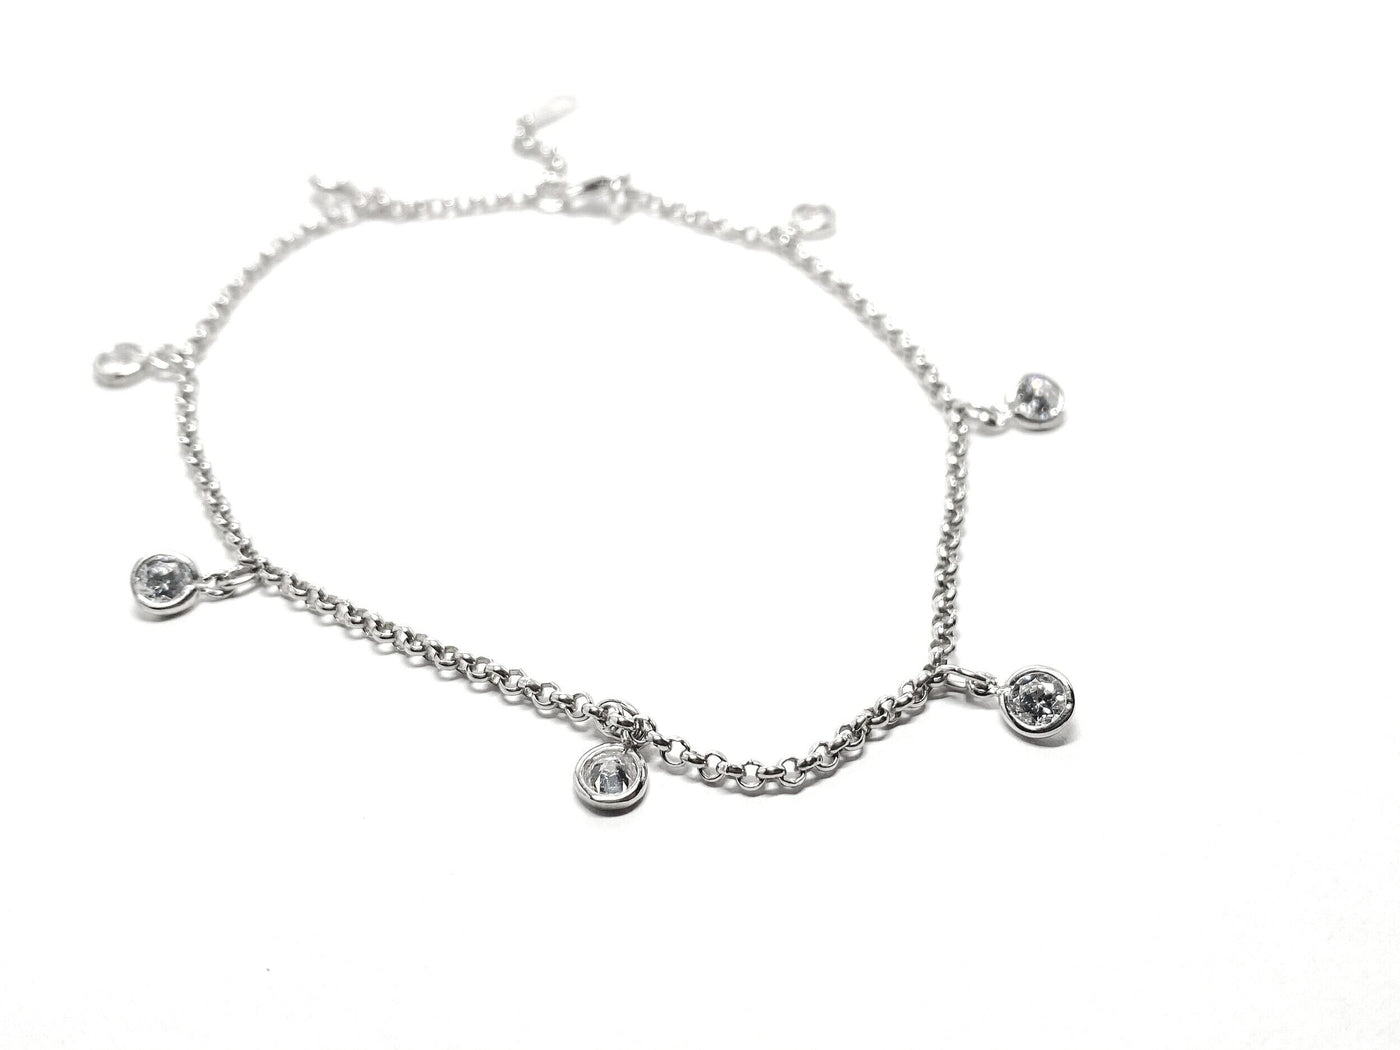 10 Karat White Gold Anklet with Dangle Cubic Zirconia Stones